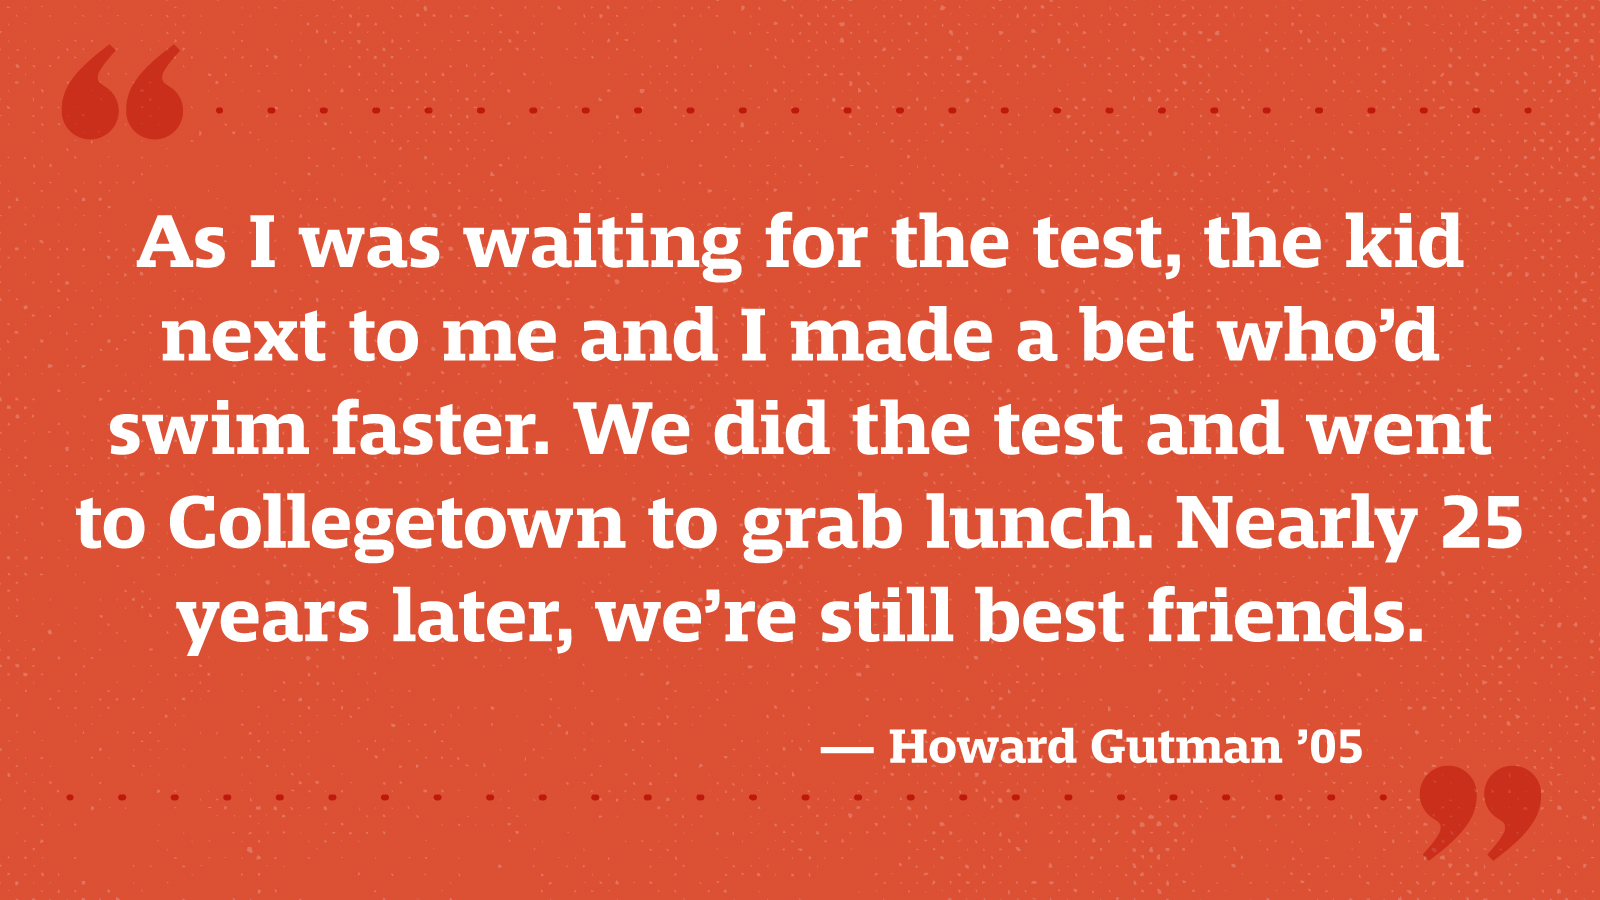 As I was waiting for the test, the kid next to me and I made a bet who’d swim faster. We did the test and went to Collegetown to grab lunch. Nearly 25 years later, we’re still best friends. — Howard Gutman ’05